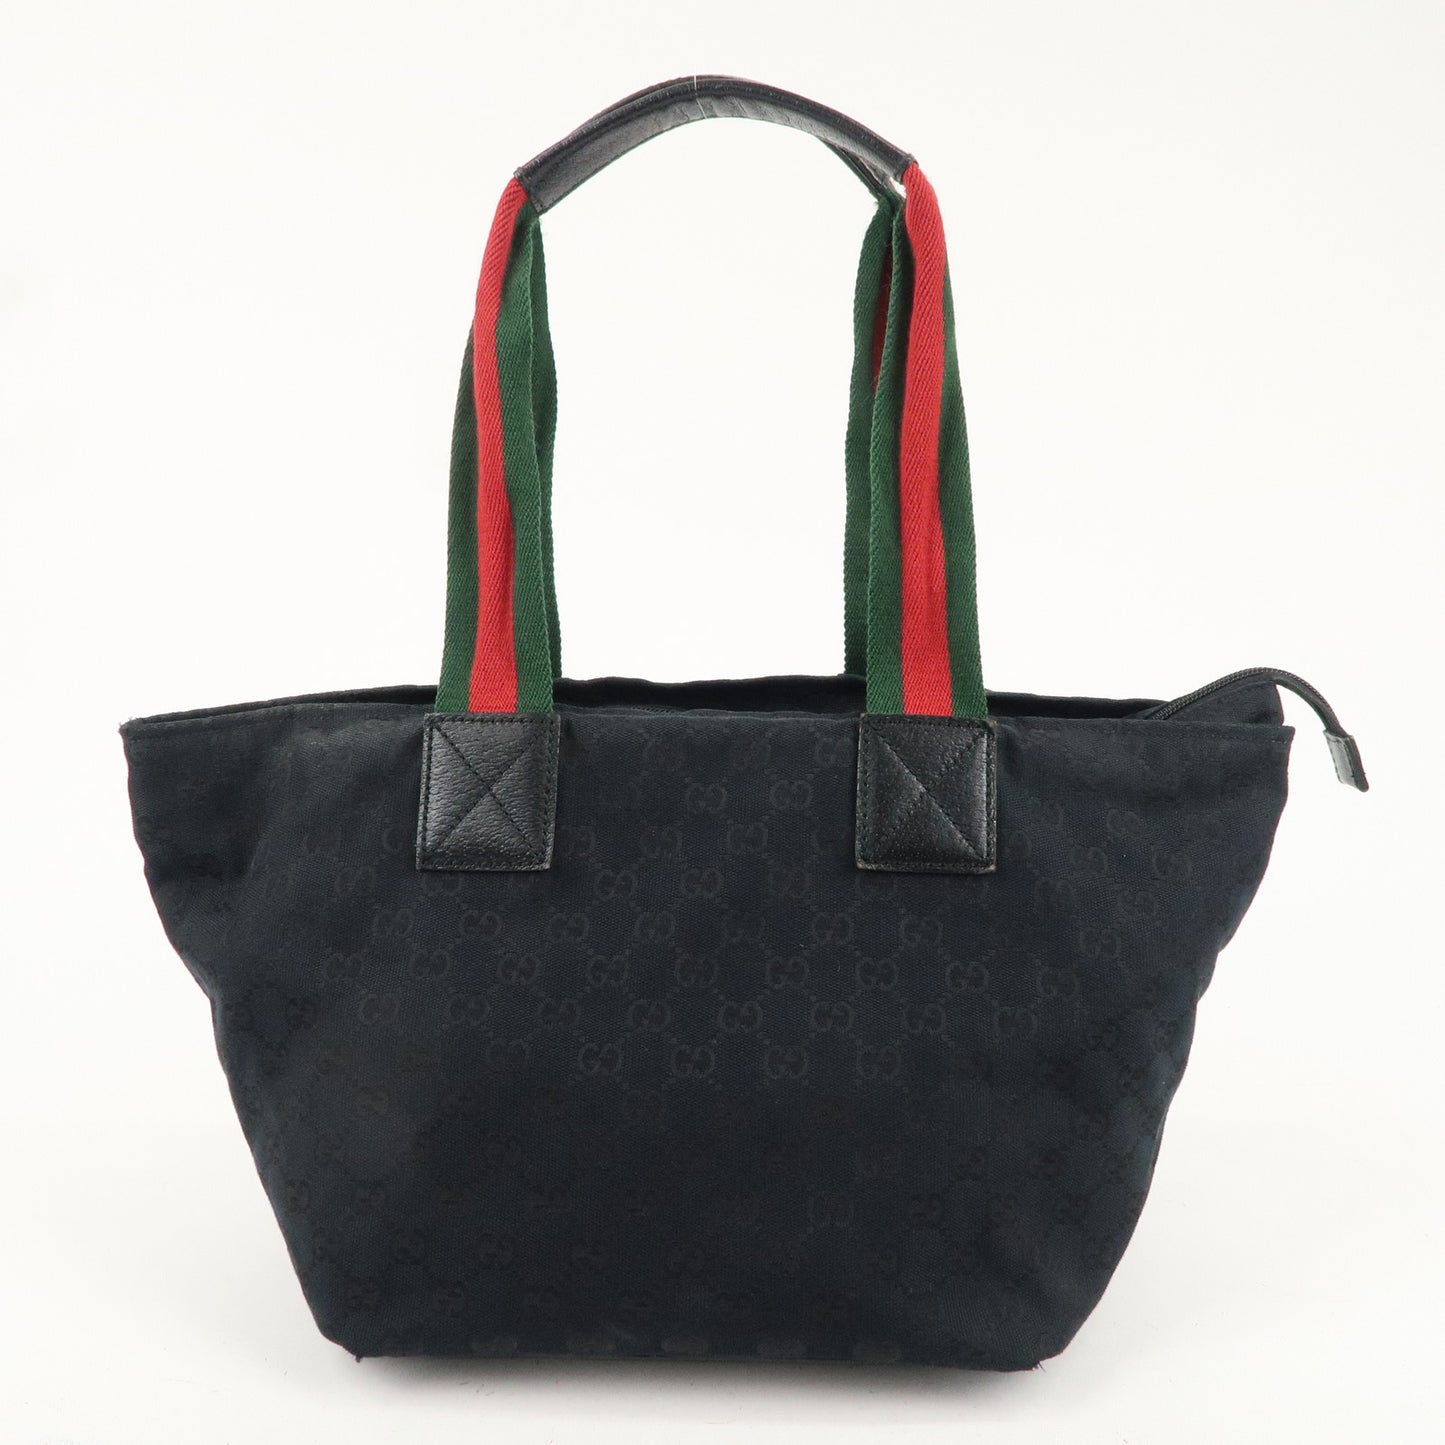 GUCCI Sherry GG Canvas Leather Tote Bag Hand Bag Black 131230